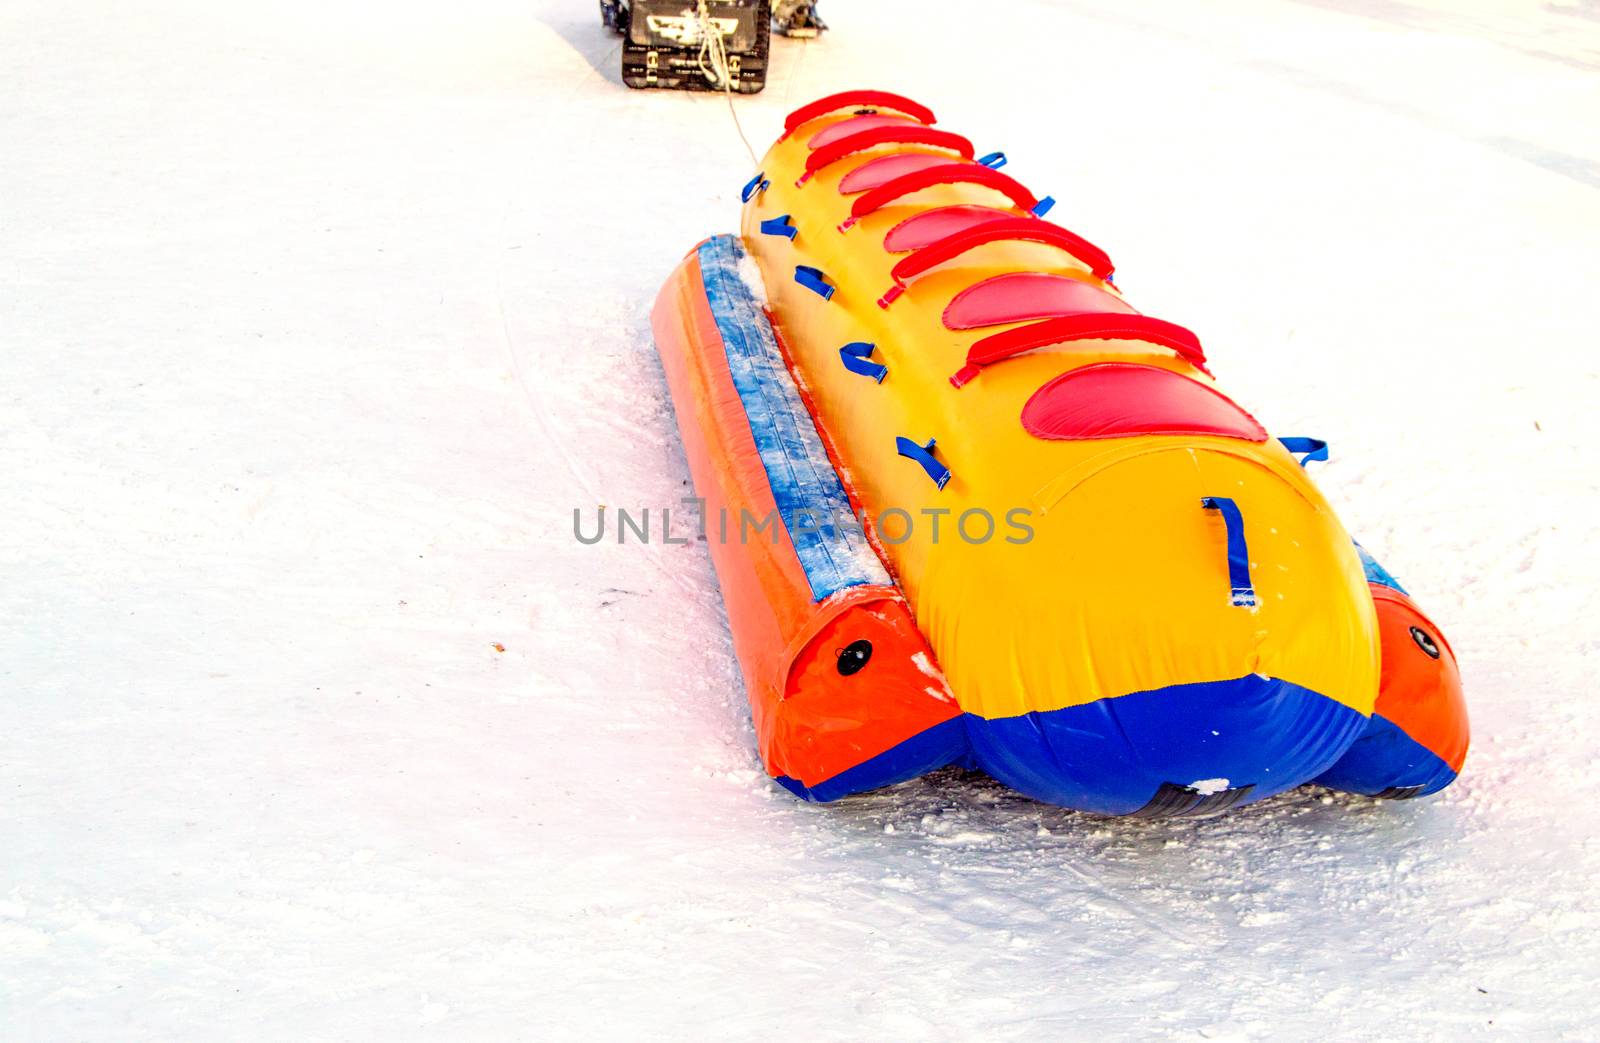 Inflatable rubber multi-seat sleigh for high-speed snow skiing in winter, winter activity concept and Christmas fun.